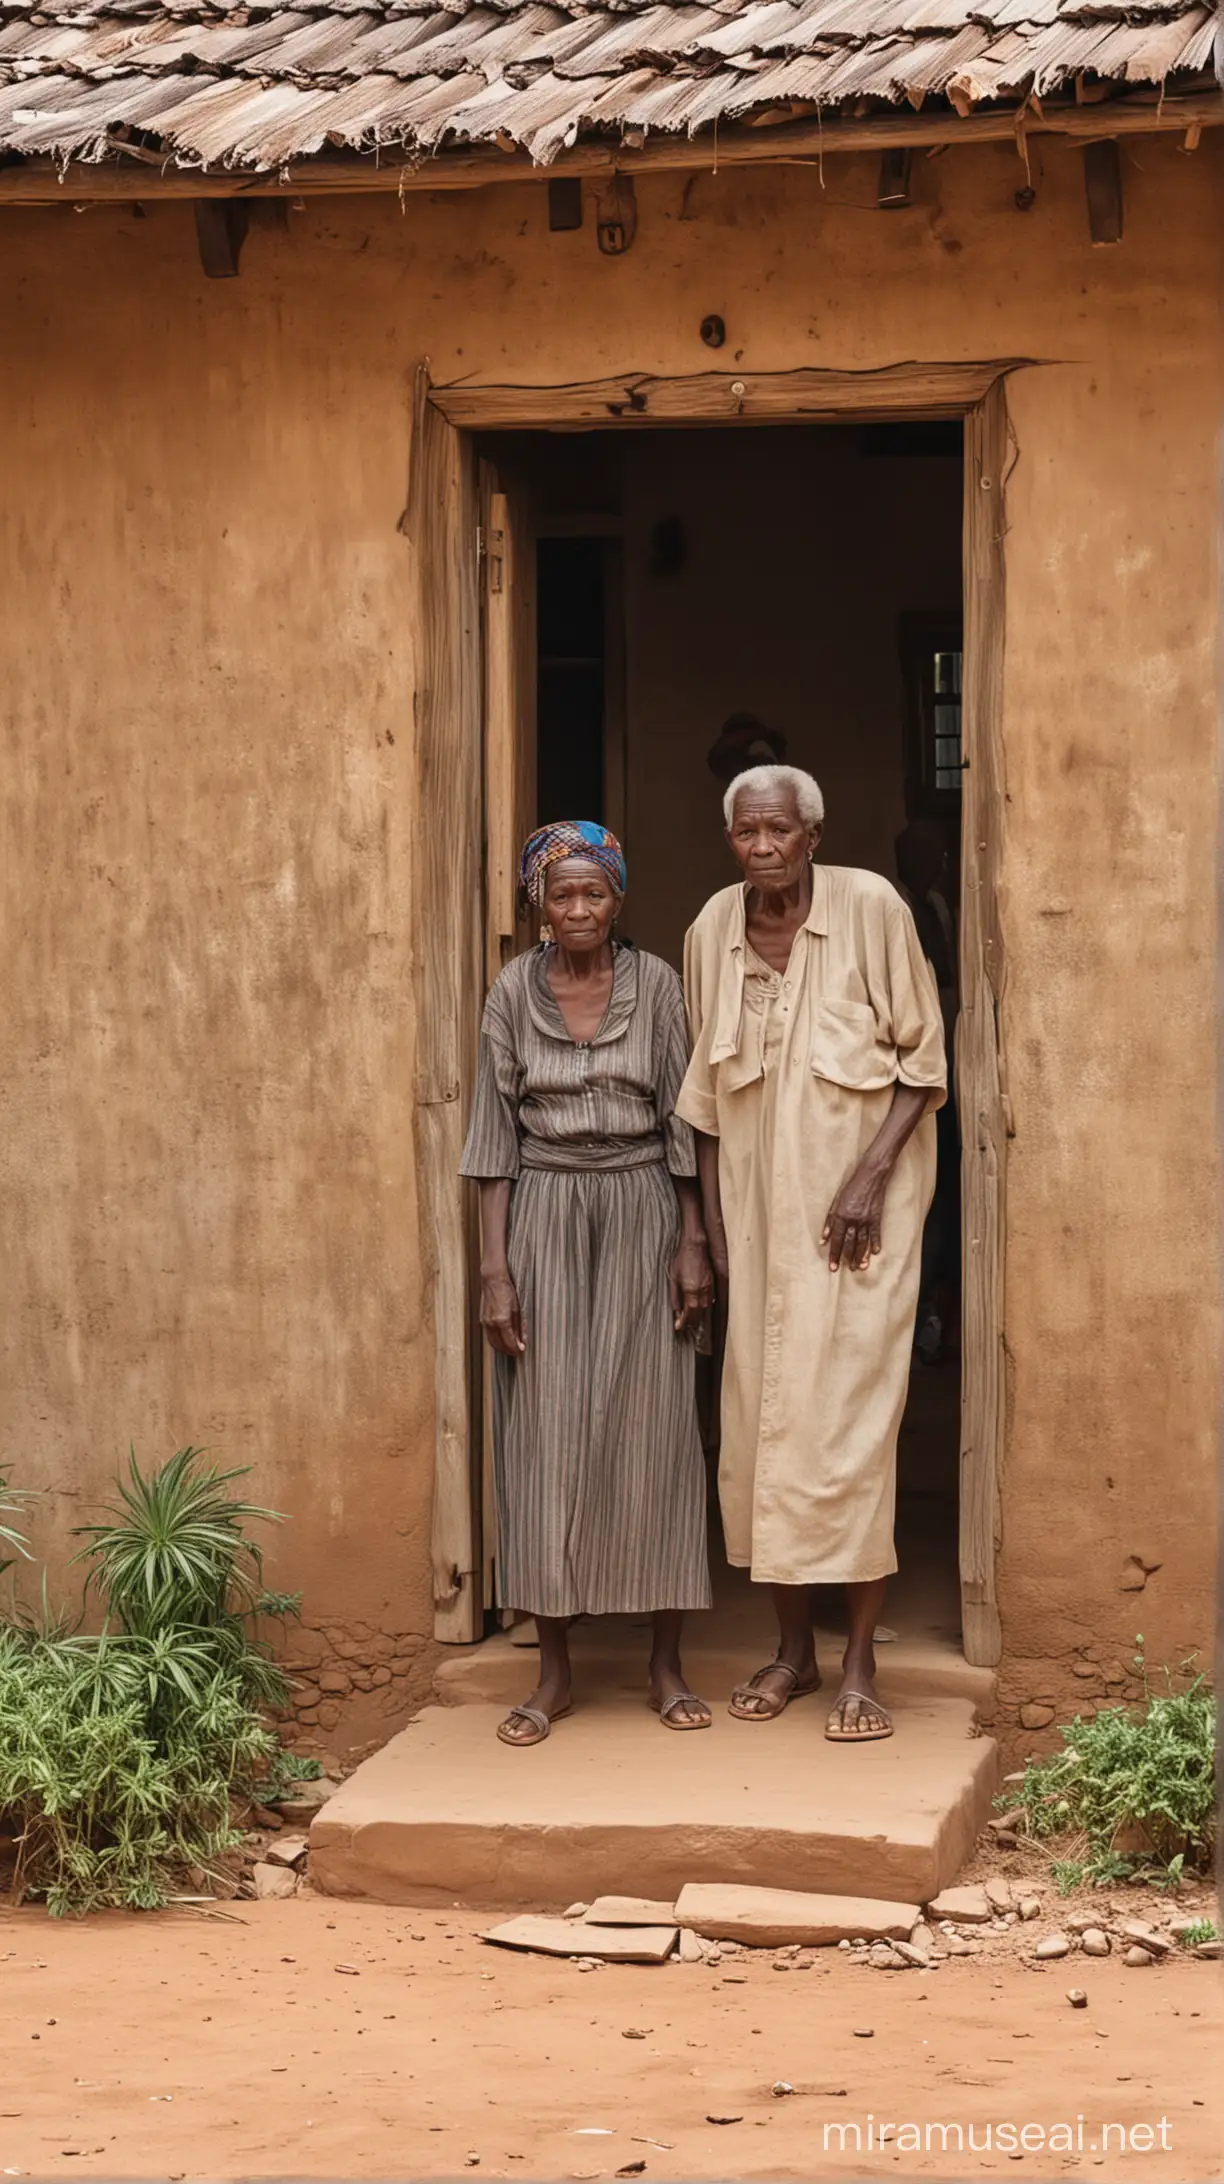 Elderly Residents Embracing Tradition in a Rustic African Village